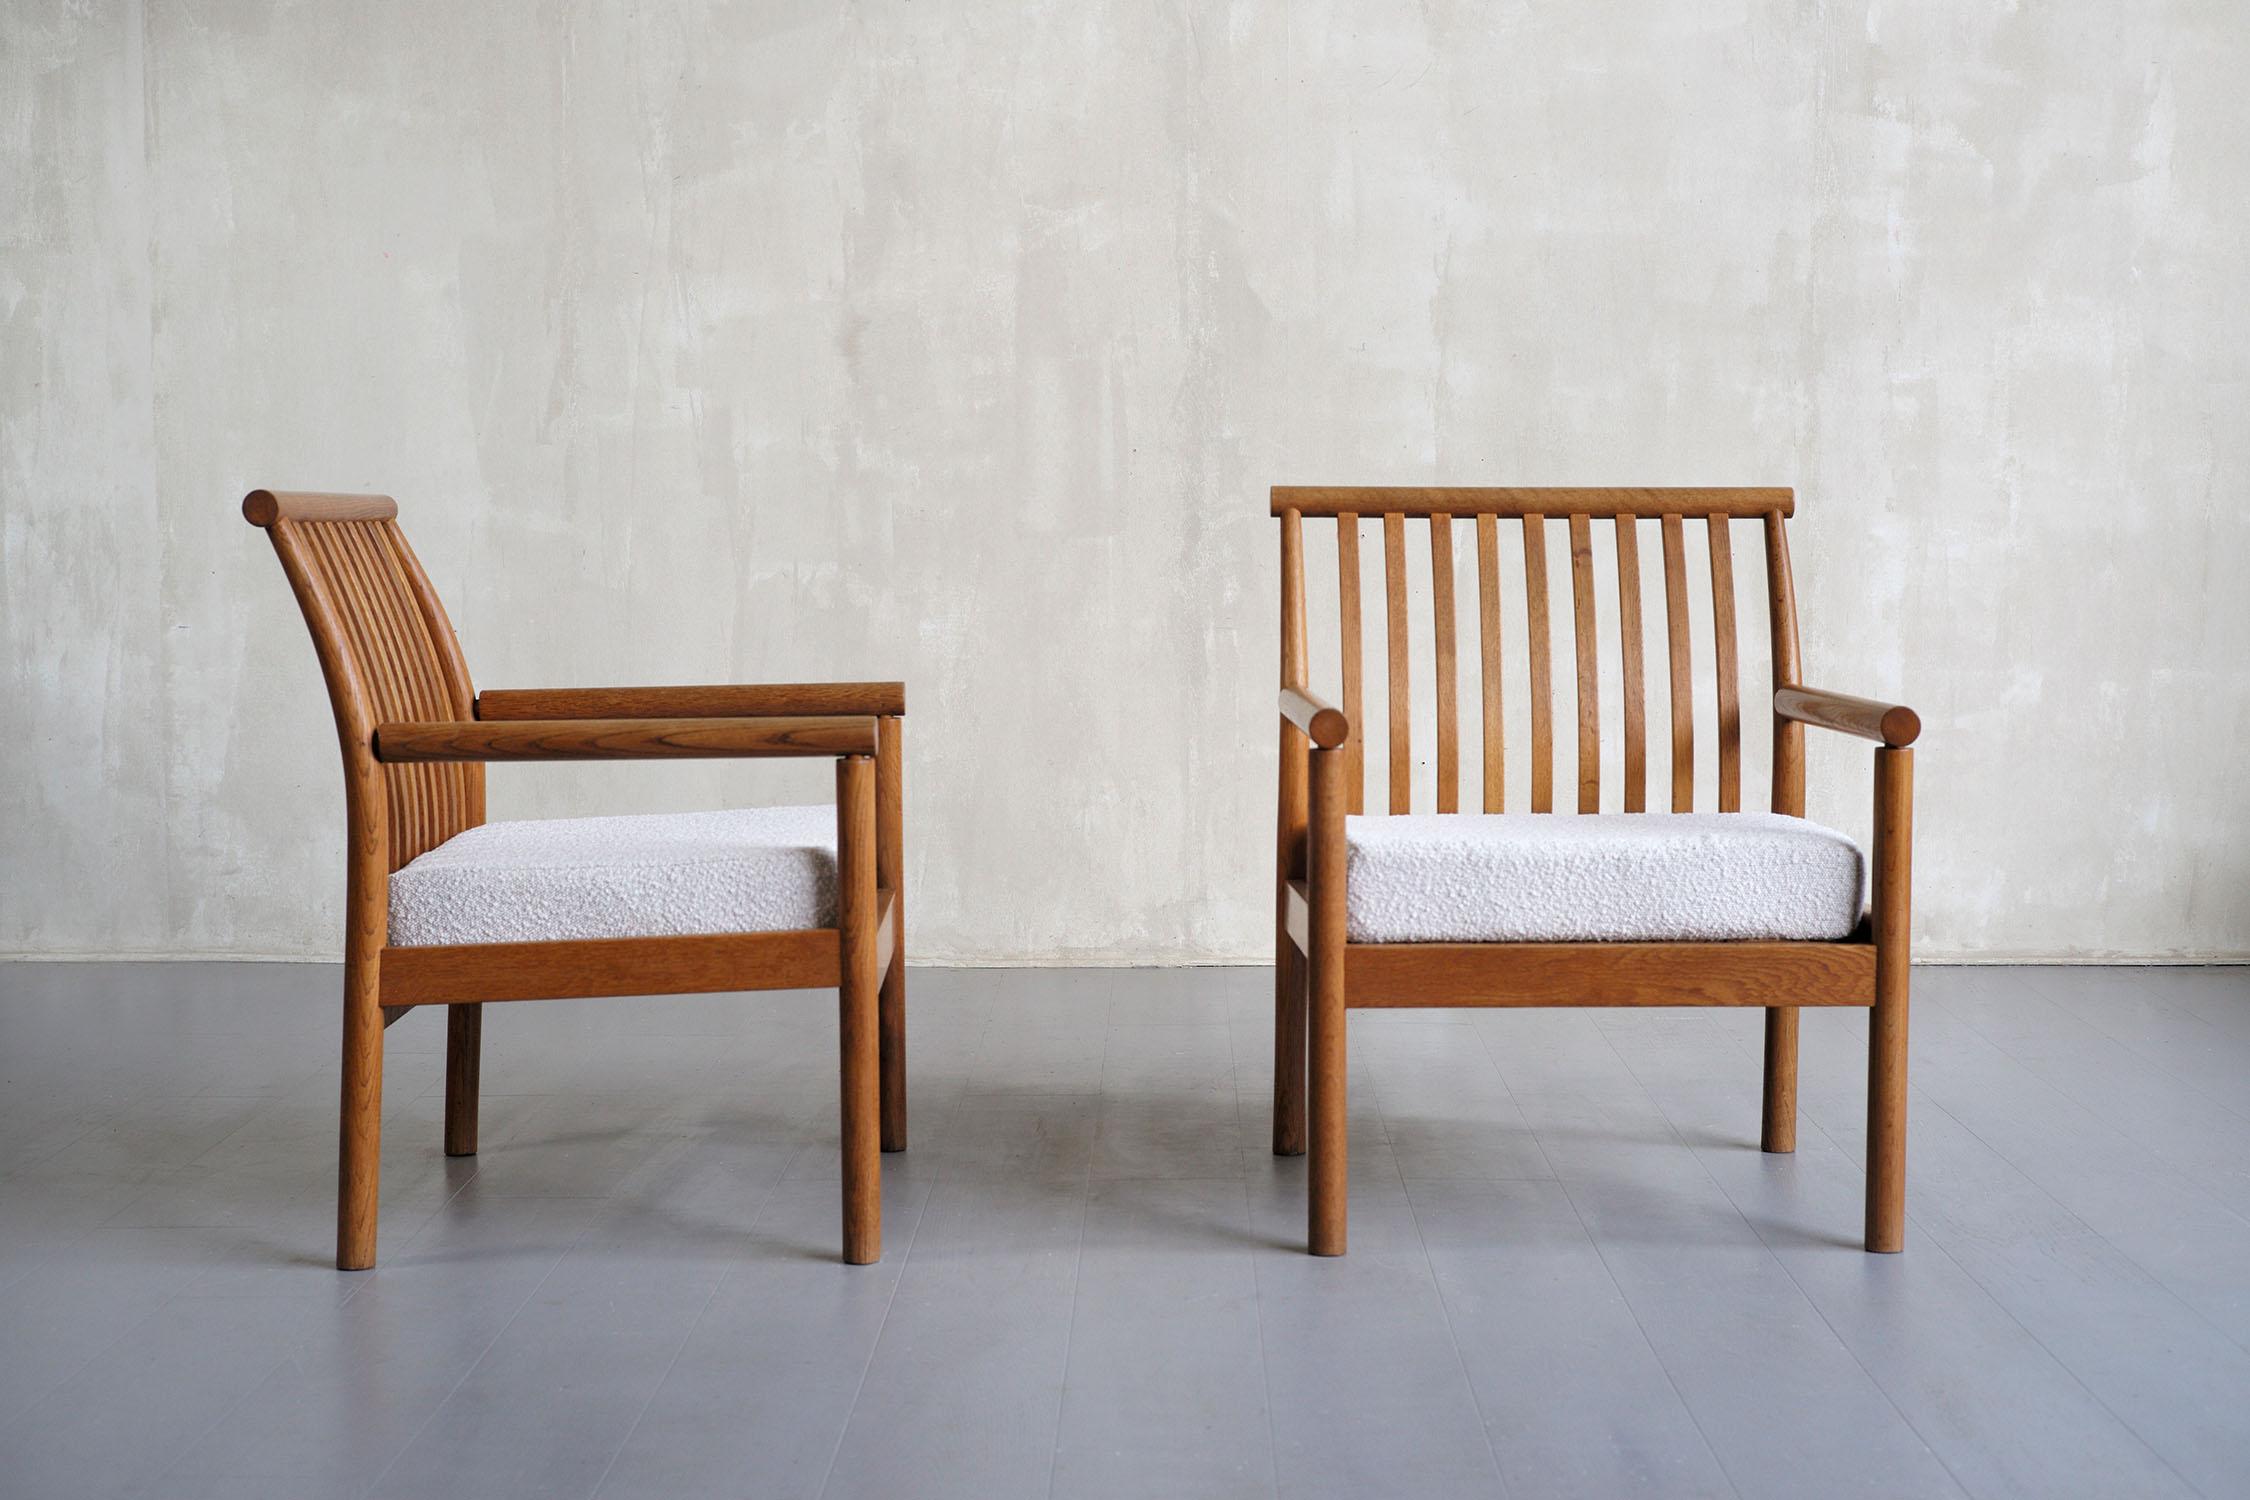 Japanese Isamu Kenmochi, Pair of Curved Oak Armchairs, Japan, 1960 For Sale